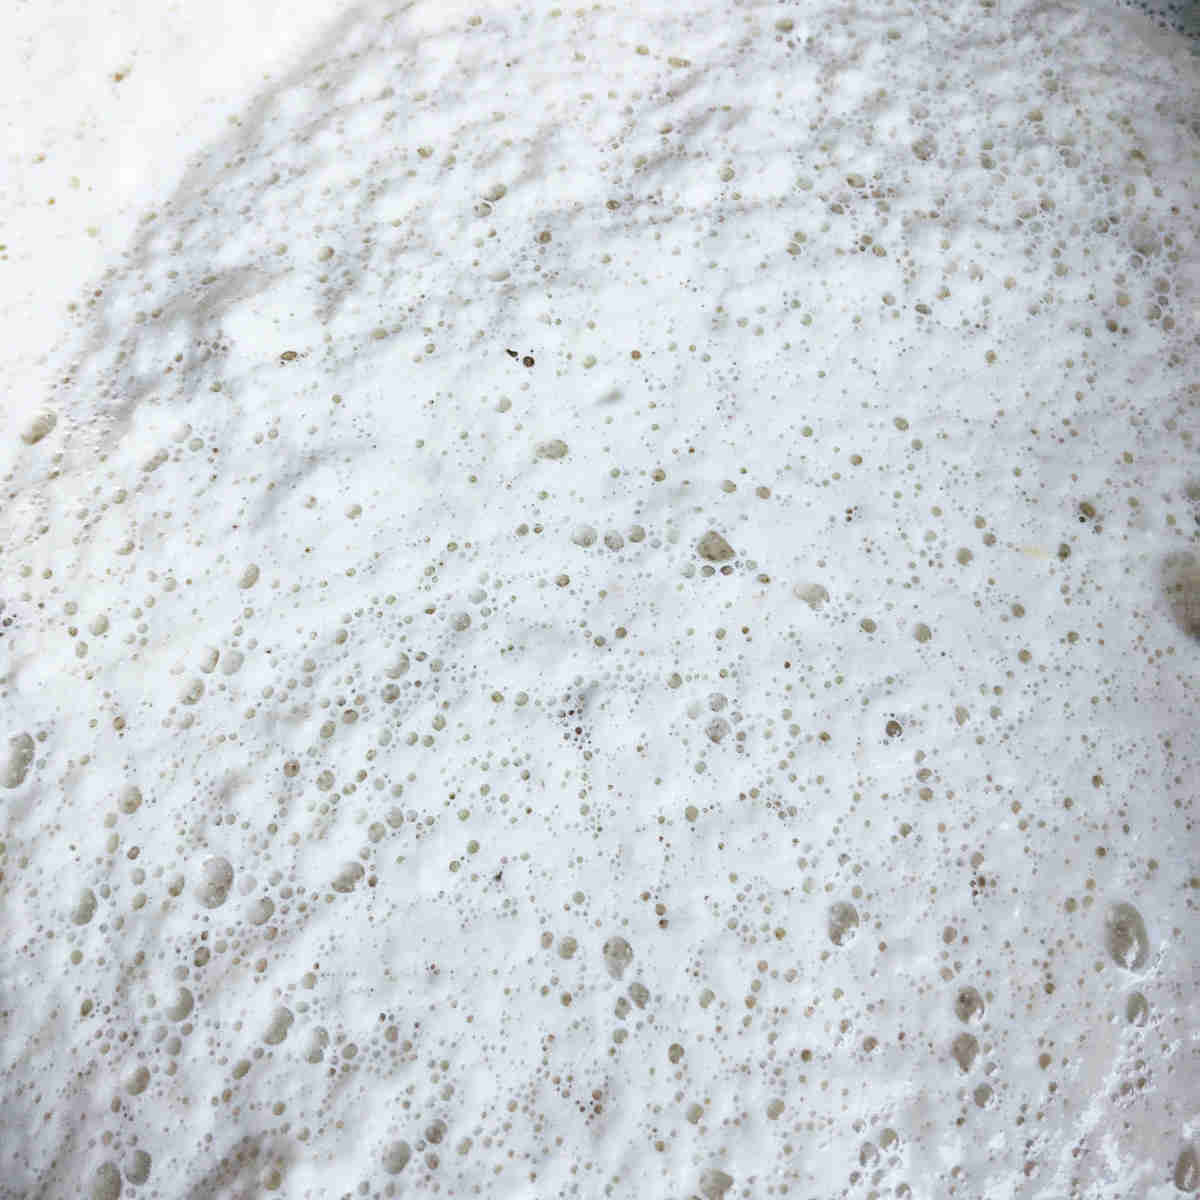 Fermented dosa batter bubbles shown in close-up.